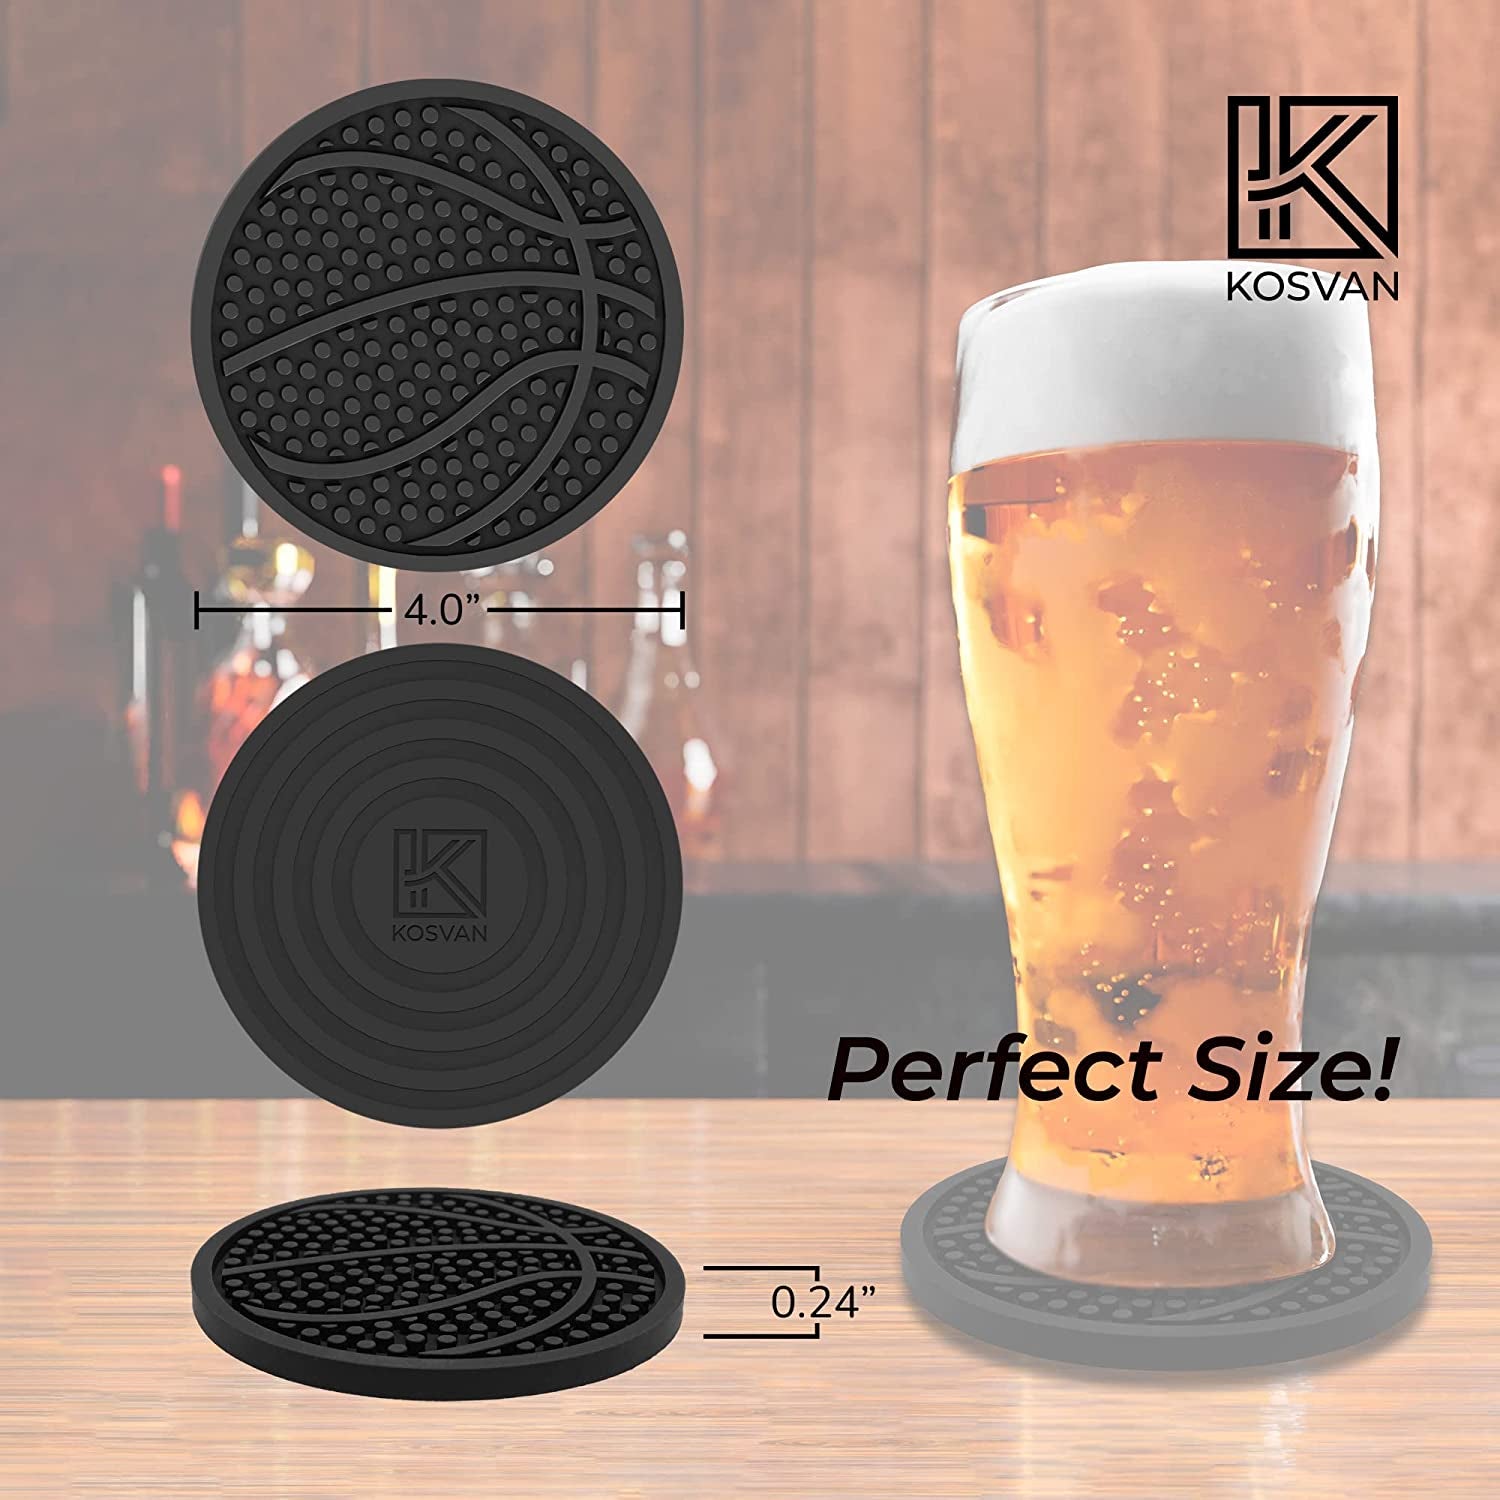 Silicone Sports Coasters by  - Set of 6 - Protection for Any Table Type - Fits Any Size of Drinking Glasses - Slip Resistant - Easy to Clean - Basketball